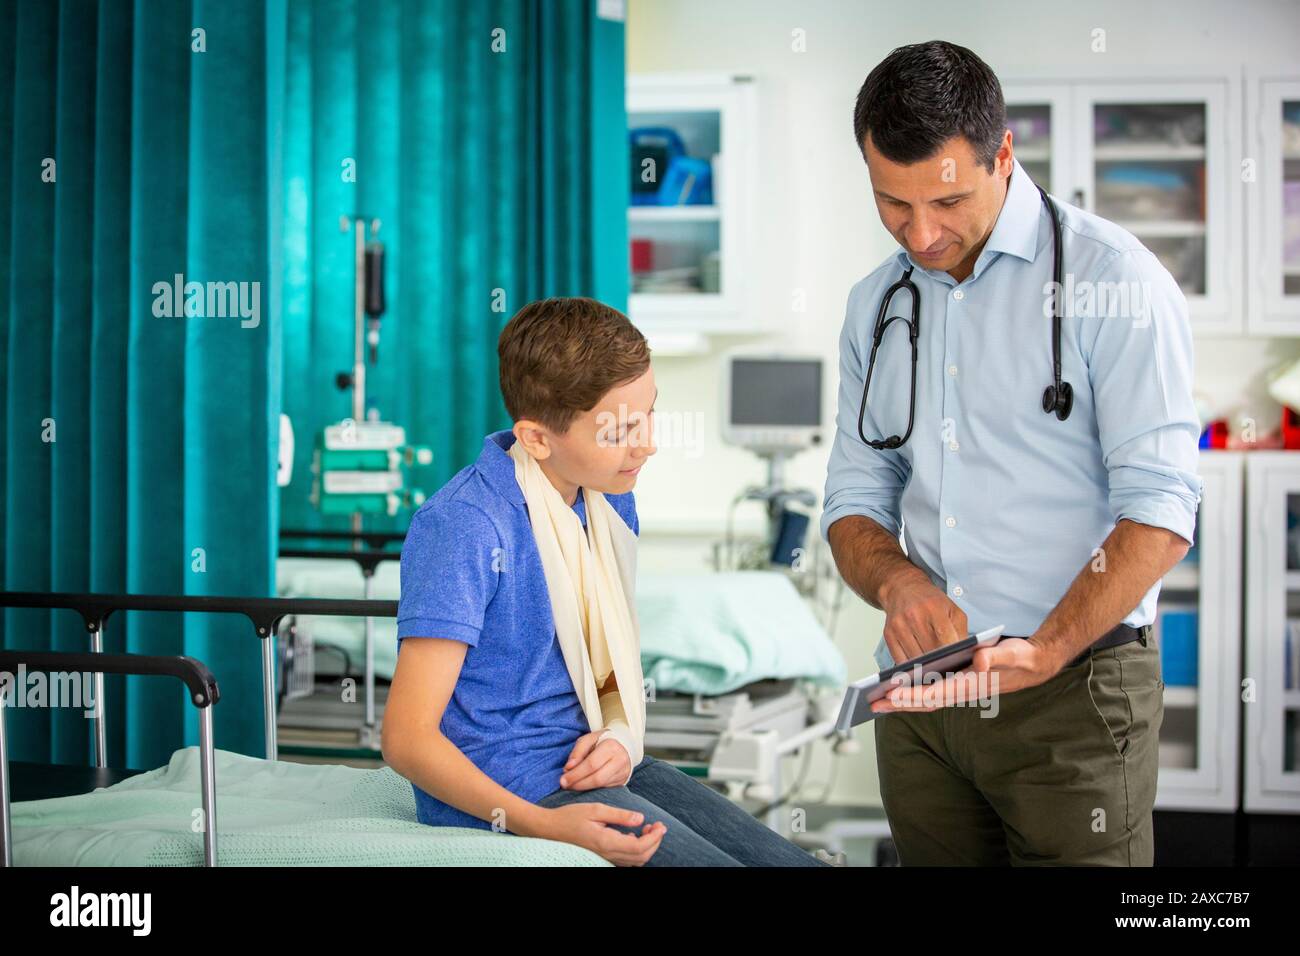 Male pediatrician showing digital tablet to boy patient with arm in sling in hospital Stock Photo